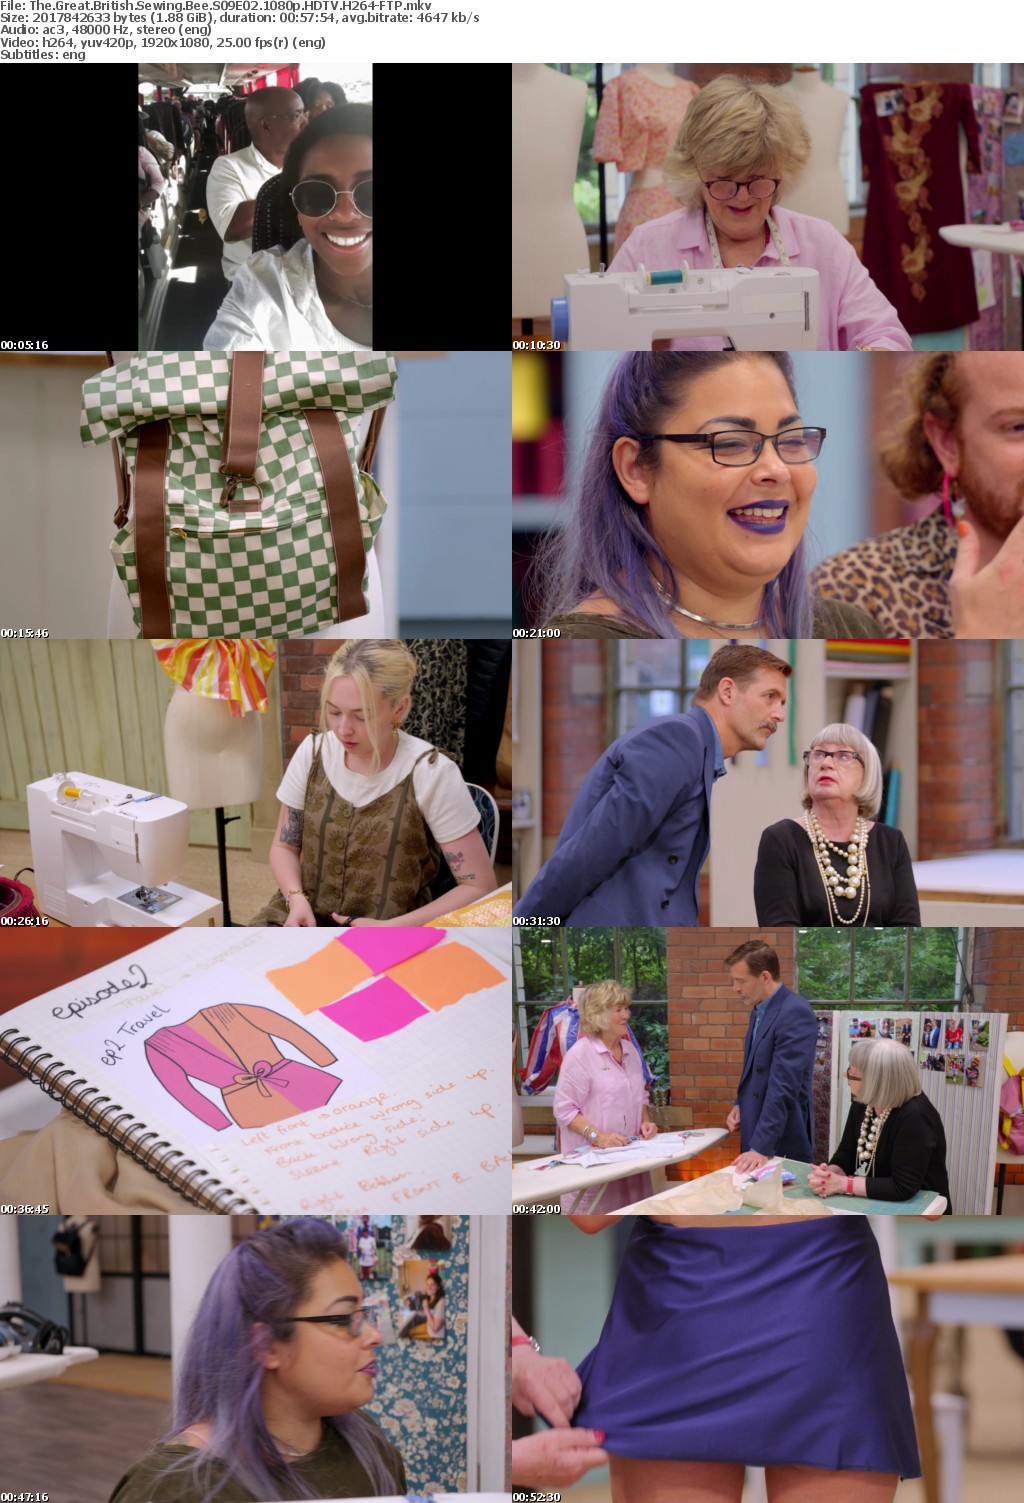 The Great British Sewing Bee S09E02 1080p HDTV H264-FTP